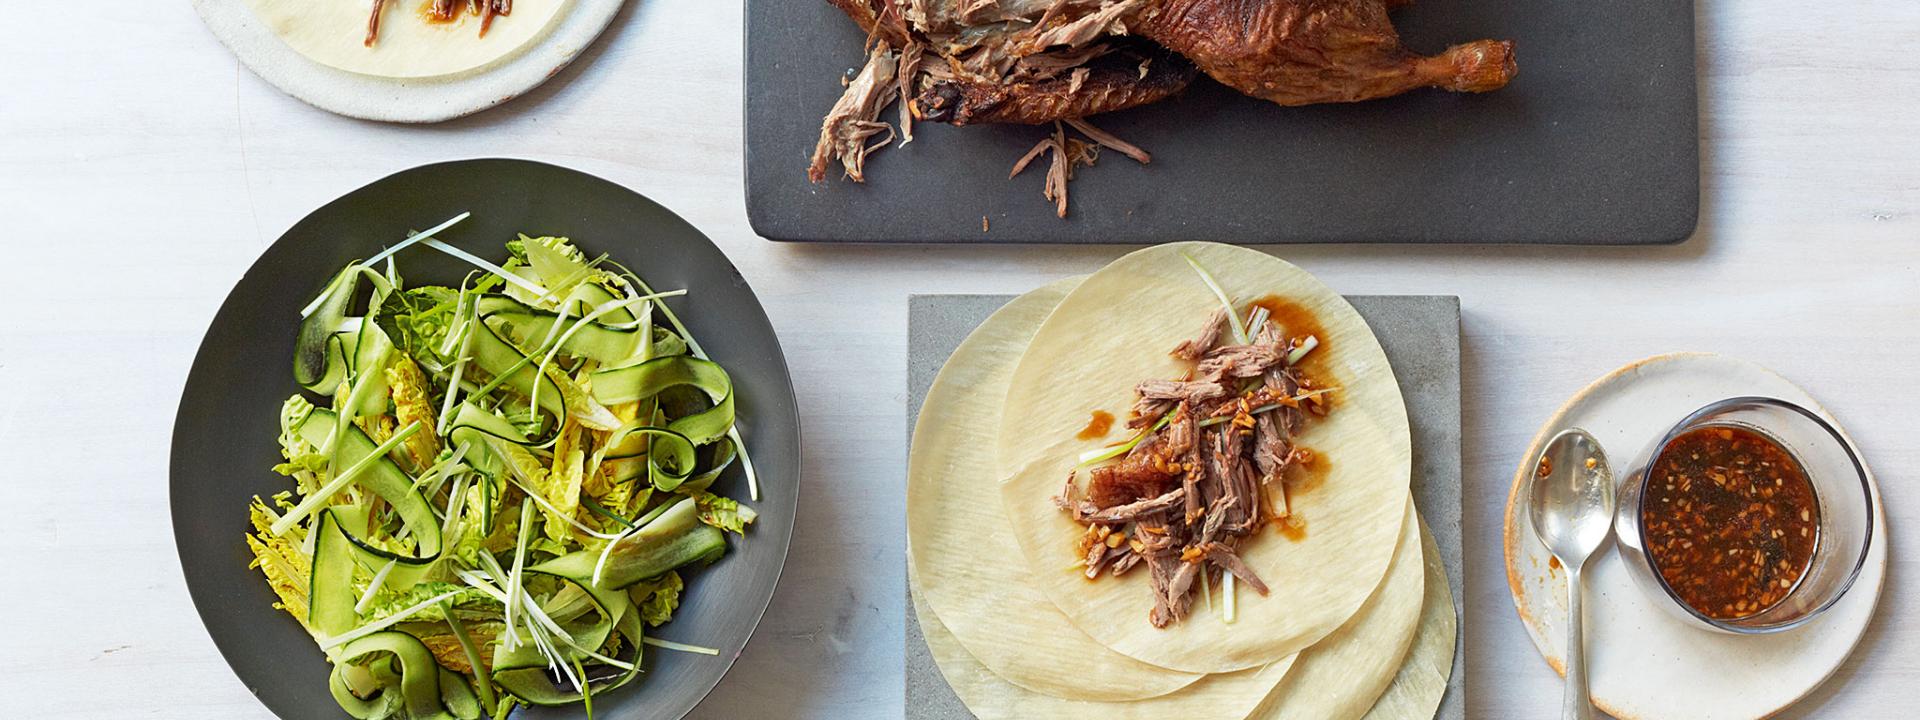 CNY Peking duck with Chinese pancakes recipe